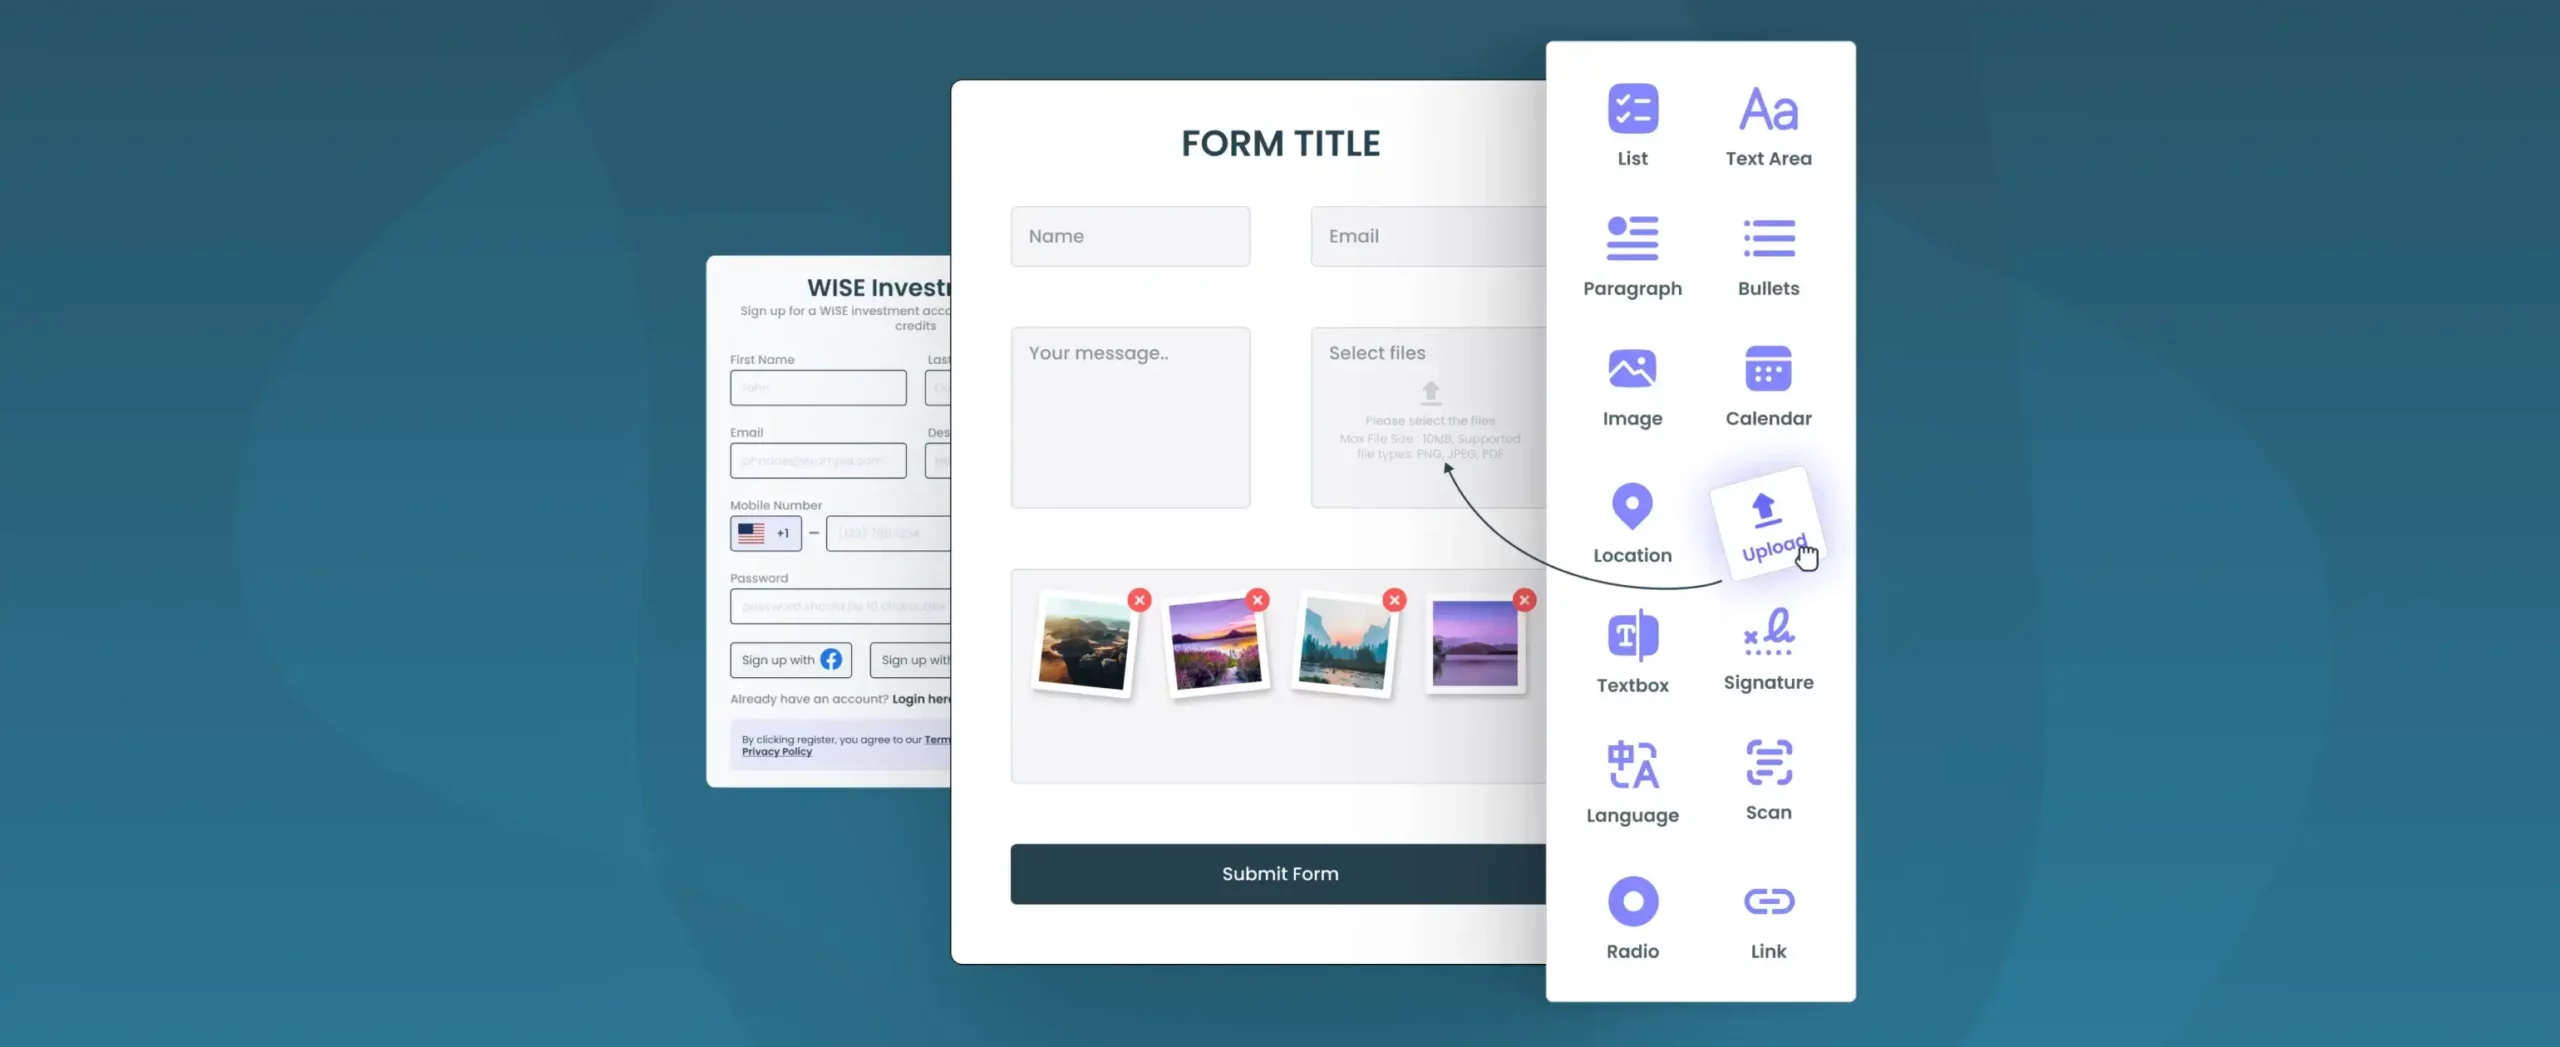 Form builder to collect and analyze data in minutes